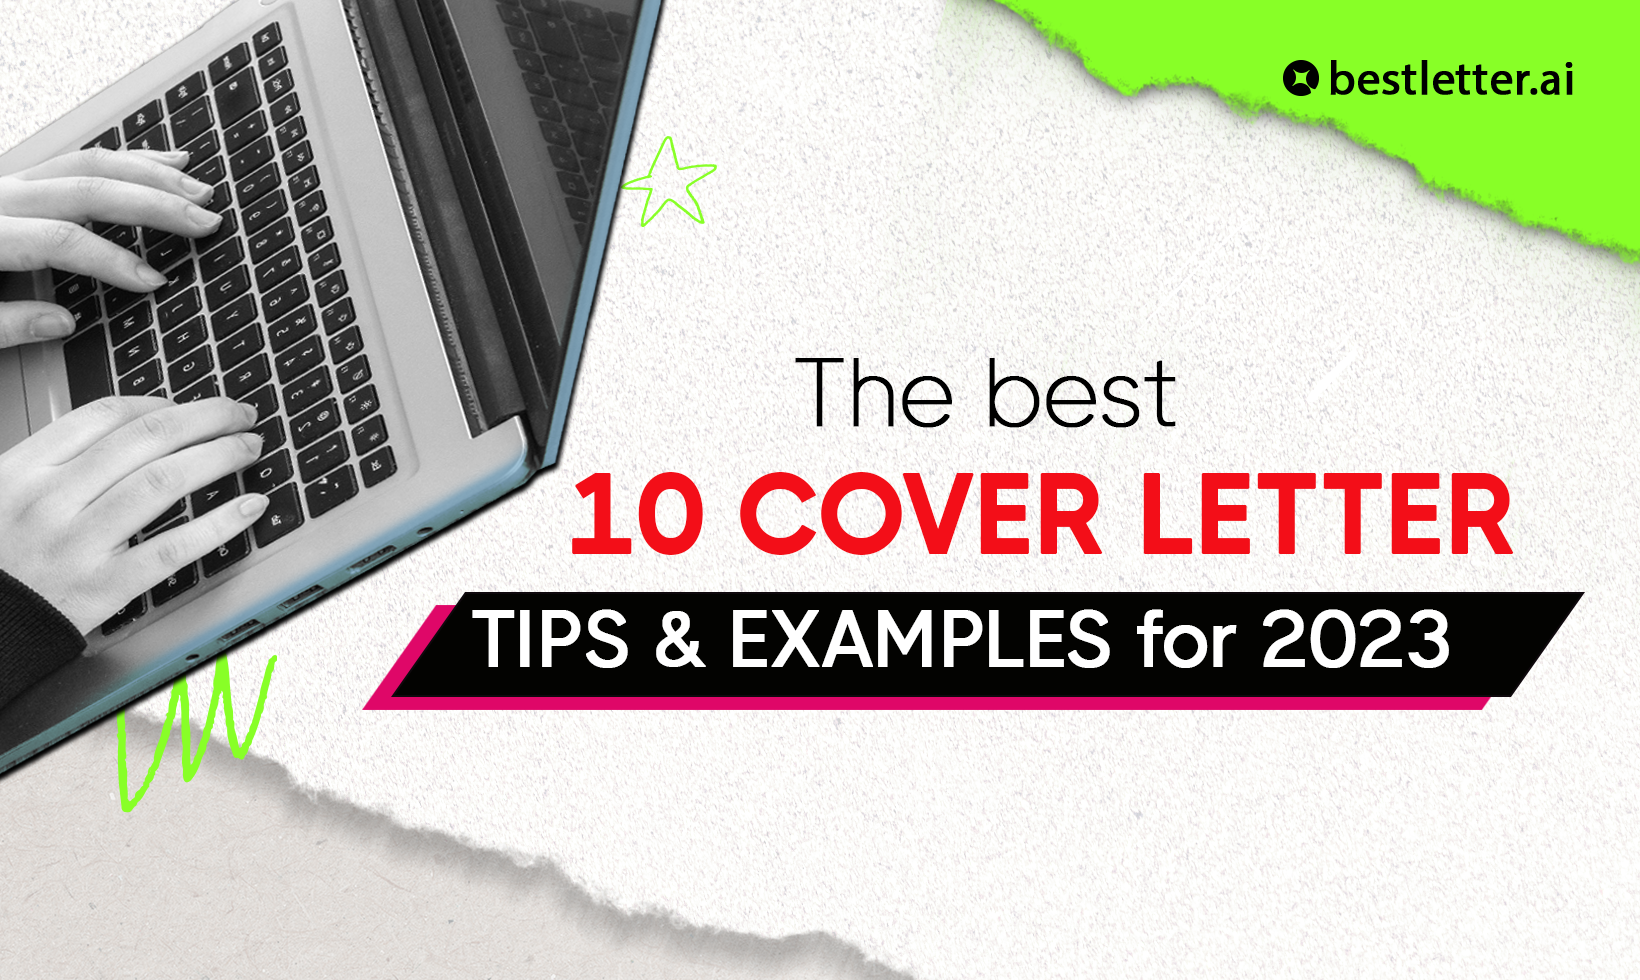 img-the-best-10-cover-letter-tips-examples-for-2023